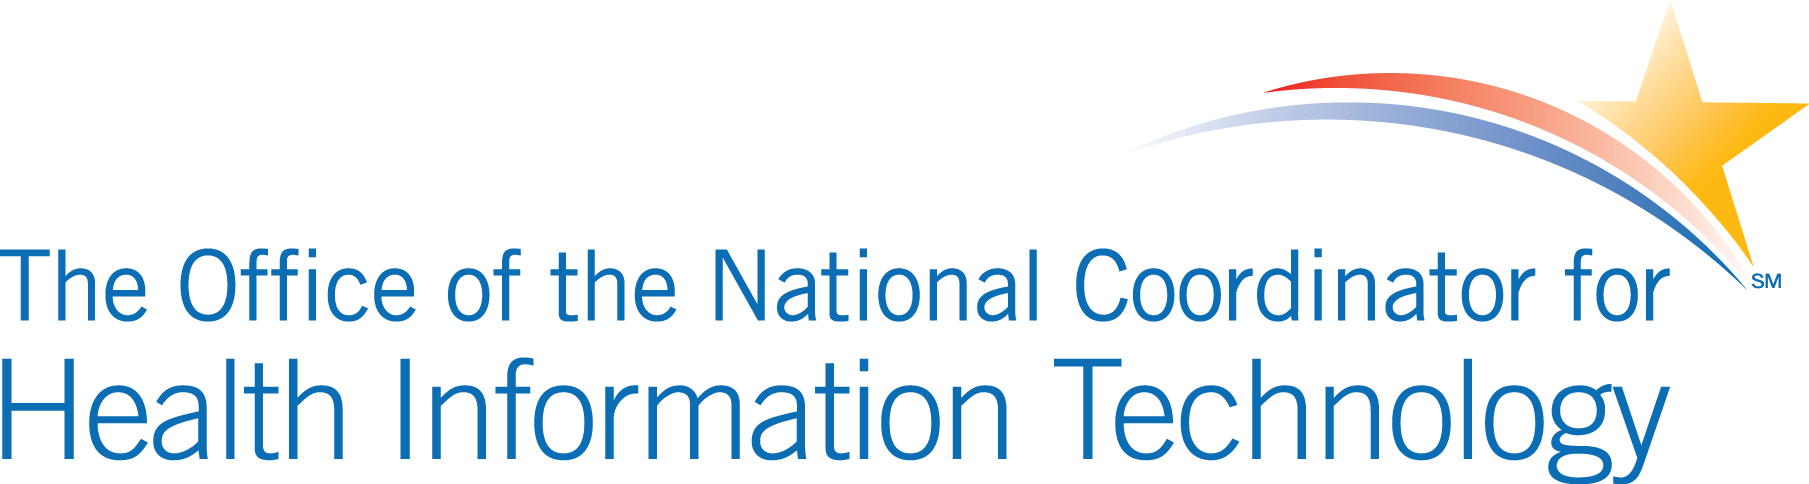 ONC_Logo_high_resolution.png